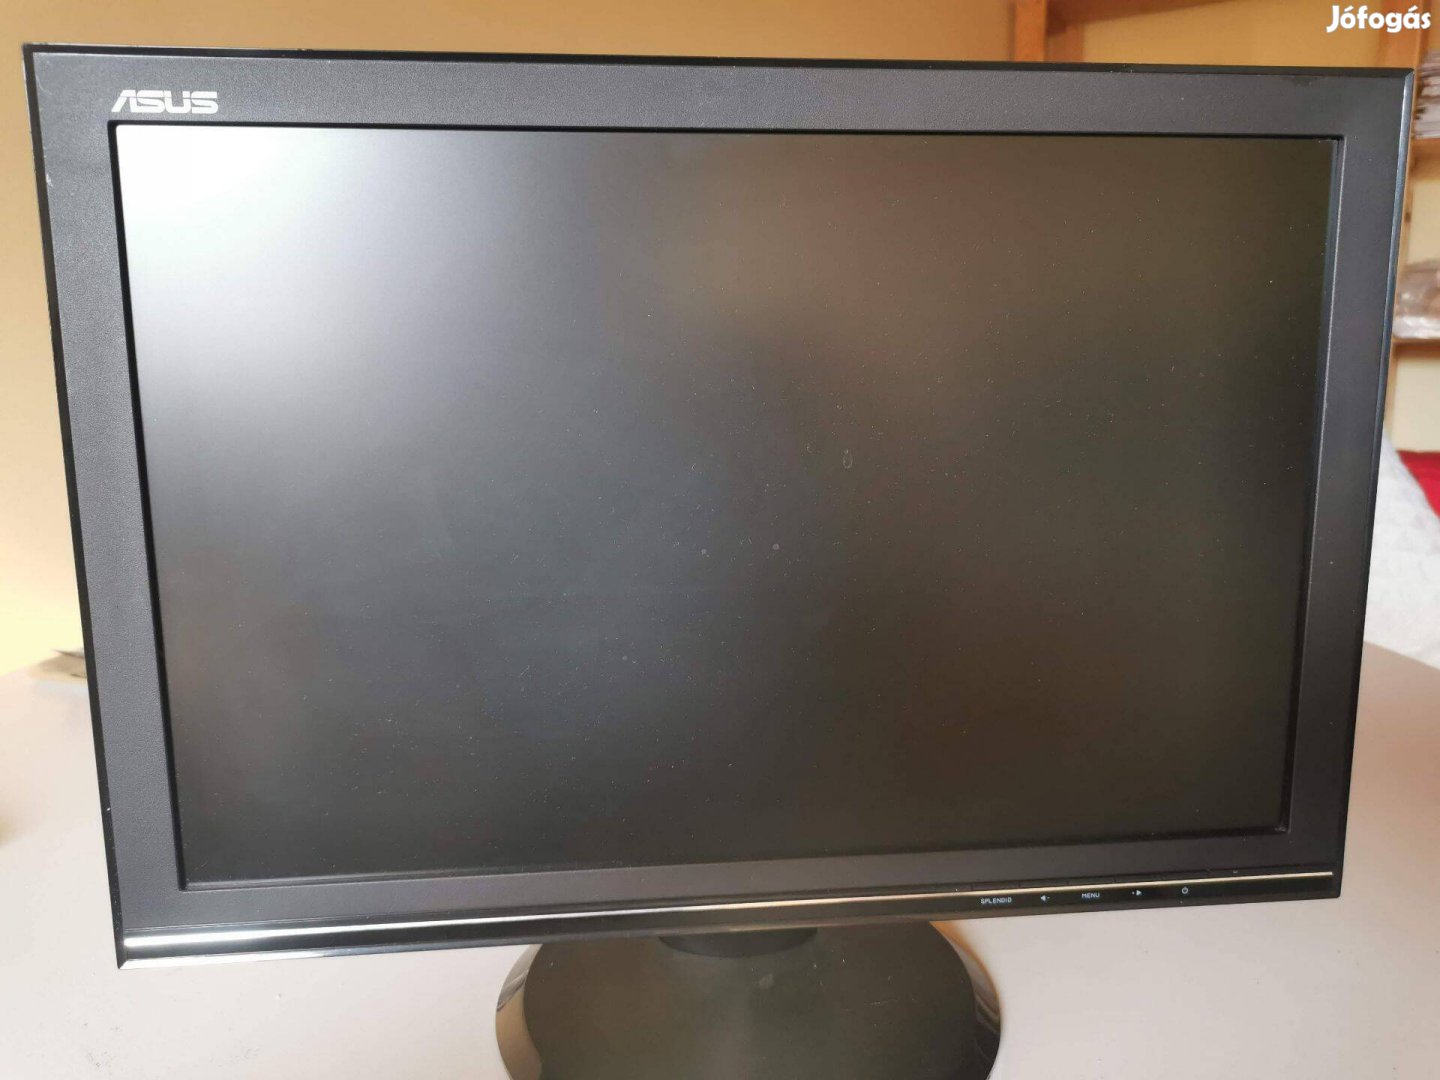 Asus VW192S monitor